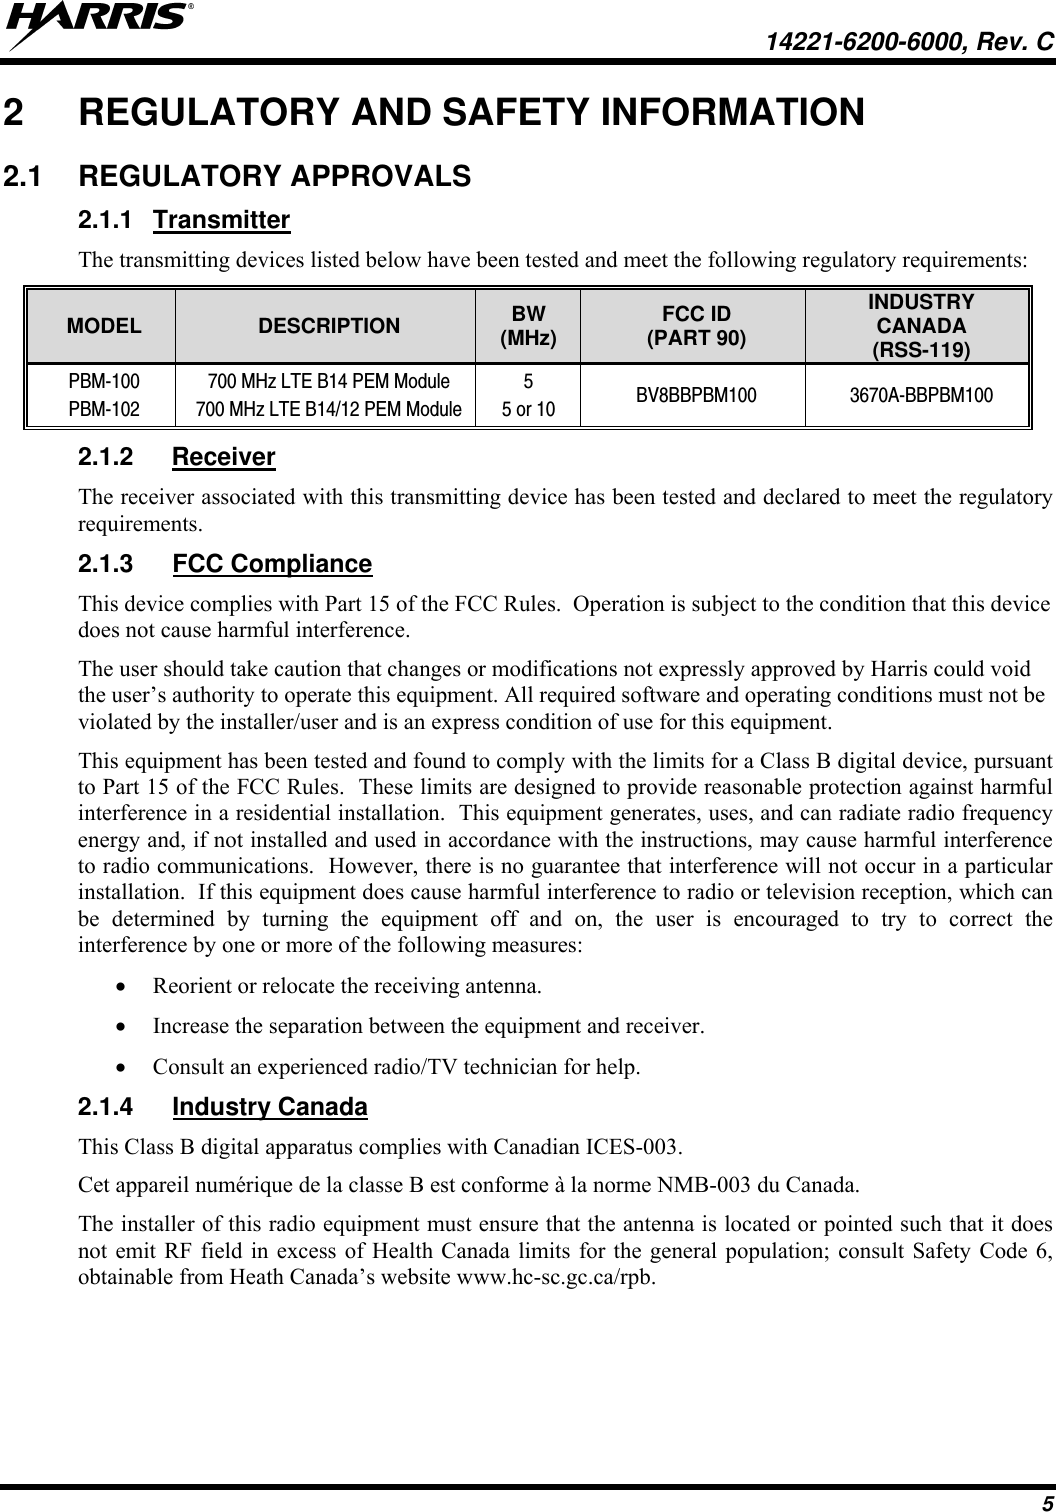   14221-6200-6000, Rev. C 5 2  REGULATORY AND SAFETY INFORMATION 2.1 REGULATORY APPROVALS 2.1.1 Transmitter The transmitting devices listed below have been tested and meet the following regulatory requirements: MODEL  DESCRIPTION  BW (MHz)  FCC ID (PART 90) INDUSTRY CANADA (RSS-119) PBM-100 PBM-102 700 MHz LTE B14 PEM Module 700 MHz LTE B14/12 PEM Module 5 5 or 10  BV8BBPBM100 3670A-BBPBM100 2.1.2 Receiver The receiver associated with this transmitting device has been tested and declared to meet the regulatory requirements. 2.1.3 FCC Compliance This device complies with Part 15 of the FCC Rules.  Operation is subject to the condition that this device does not cause harmful interference. The user should take caution that changes or modifications not expressly approved by Harris could void the user’s authority to operate this equipment. All required software and operating conditions must not be violated by the installer/user and is an express condition of use for this equipment. This equipment has been tested and found to comply with the limits for a Class B digital device, pursuant to Part 15 of the FCC Rules.  These limits are designed to provide reasonable protection against harmful interference in a residential installation.  This equipment generates, uses, and can radiate radio frequency energy and, if not installed and used in accordance with the instructions, may cause harmful interference to radio communications.  However, there is no guarantee that interference will not occur in a particular installation.  If this equipment does cause harmful interference to radio or television reception, which can be determined by turning the equipment off and on, the user is encouraged to try to correct the interference by one or more of the following measures:  Reorient or relocate the receiving antenna.  Increase the separation between the equipment and receiver.  Consult an experienced radio/TV technician for help. 2.1.4 Industry Canada This Class B digital apparatus complies with Canadian ICES-003. Cet appareil numérique de la classe B est conforme à la norme NMB-003 du Canada. The installer of this radio equipment must ensure that the antenna is located or pointed such that it does not emit RF field in excess of Health Canada limits for the general population; consult Safety Code 6, obtainable from Heath Canada’s website www.hc-sc.gc.ca/rpb. 